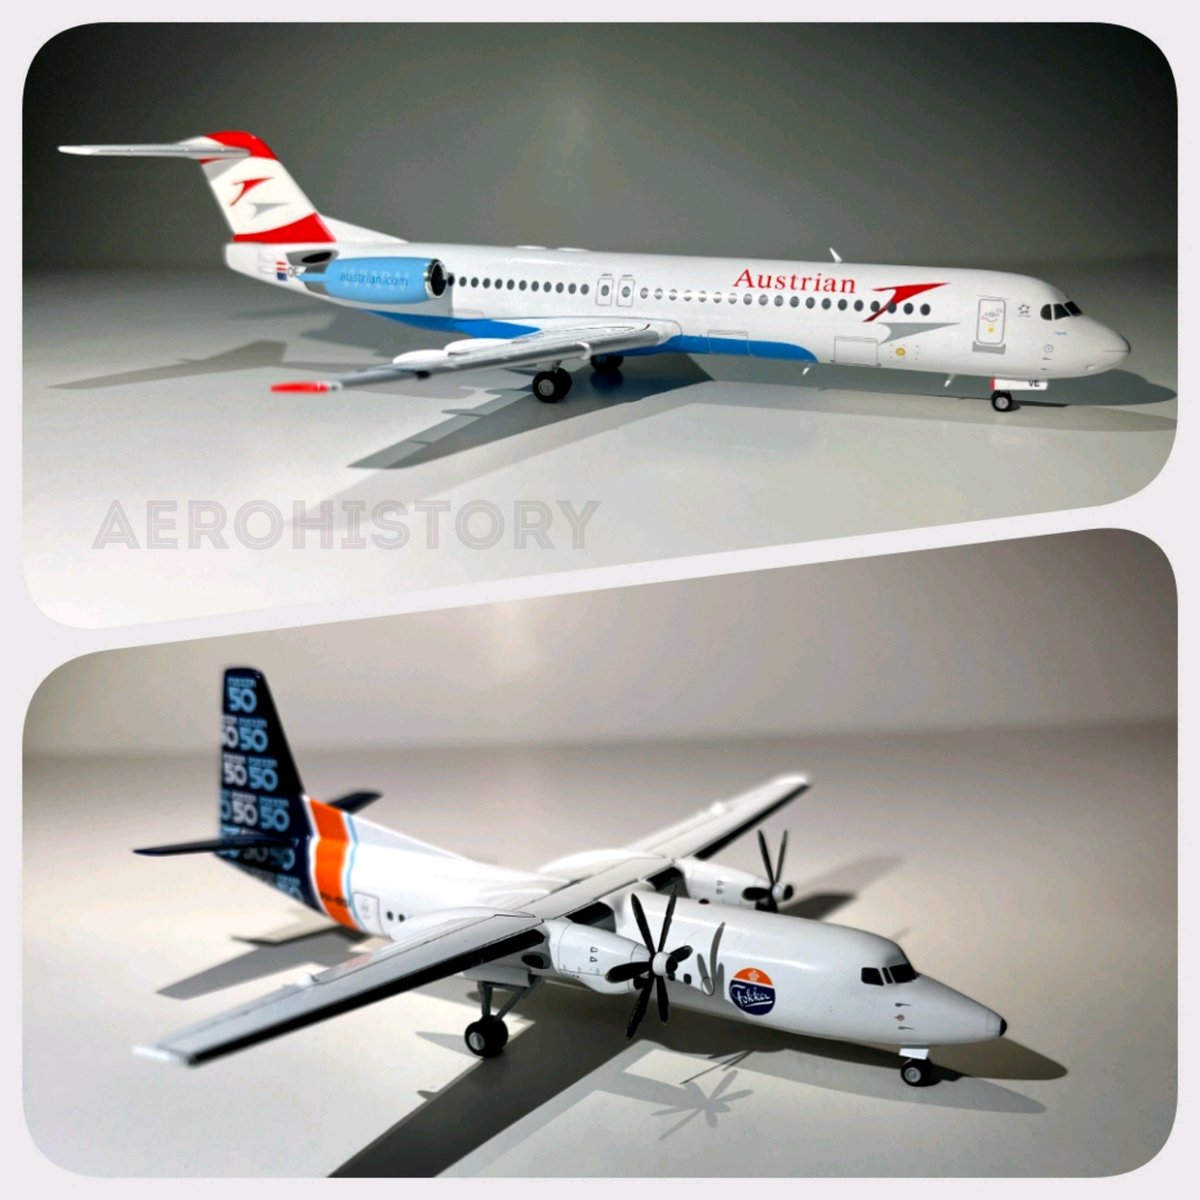 ✅ Fokker 100 and Fokker 50 are two famous products of Fokker company.
You can buy NFT of these aircrafts on my page with a very good discount.
▶️ opensea.io/Aerohistory

#nft #nftaviation #aviation #NFTCommunitys #nftphotography #NFTGiveaway #NFTdrop #NFTartist #nftsal